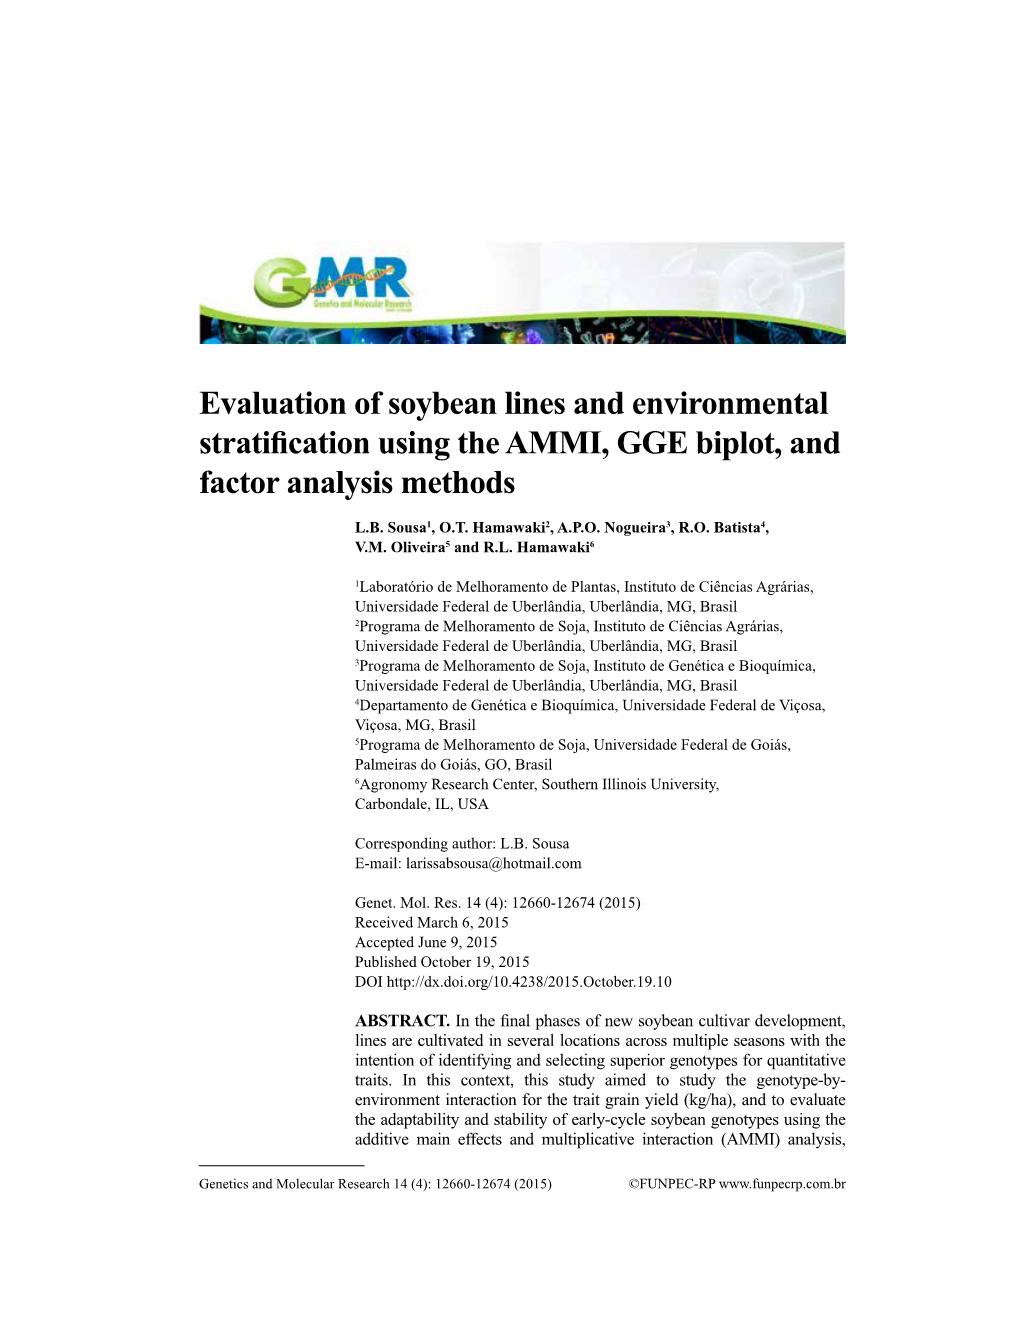 Evaluation of Soybean Lines and Environmental Stratification Using the AMMI, GGE Biplot, and Factor Analysis Methods